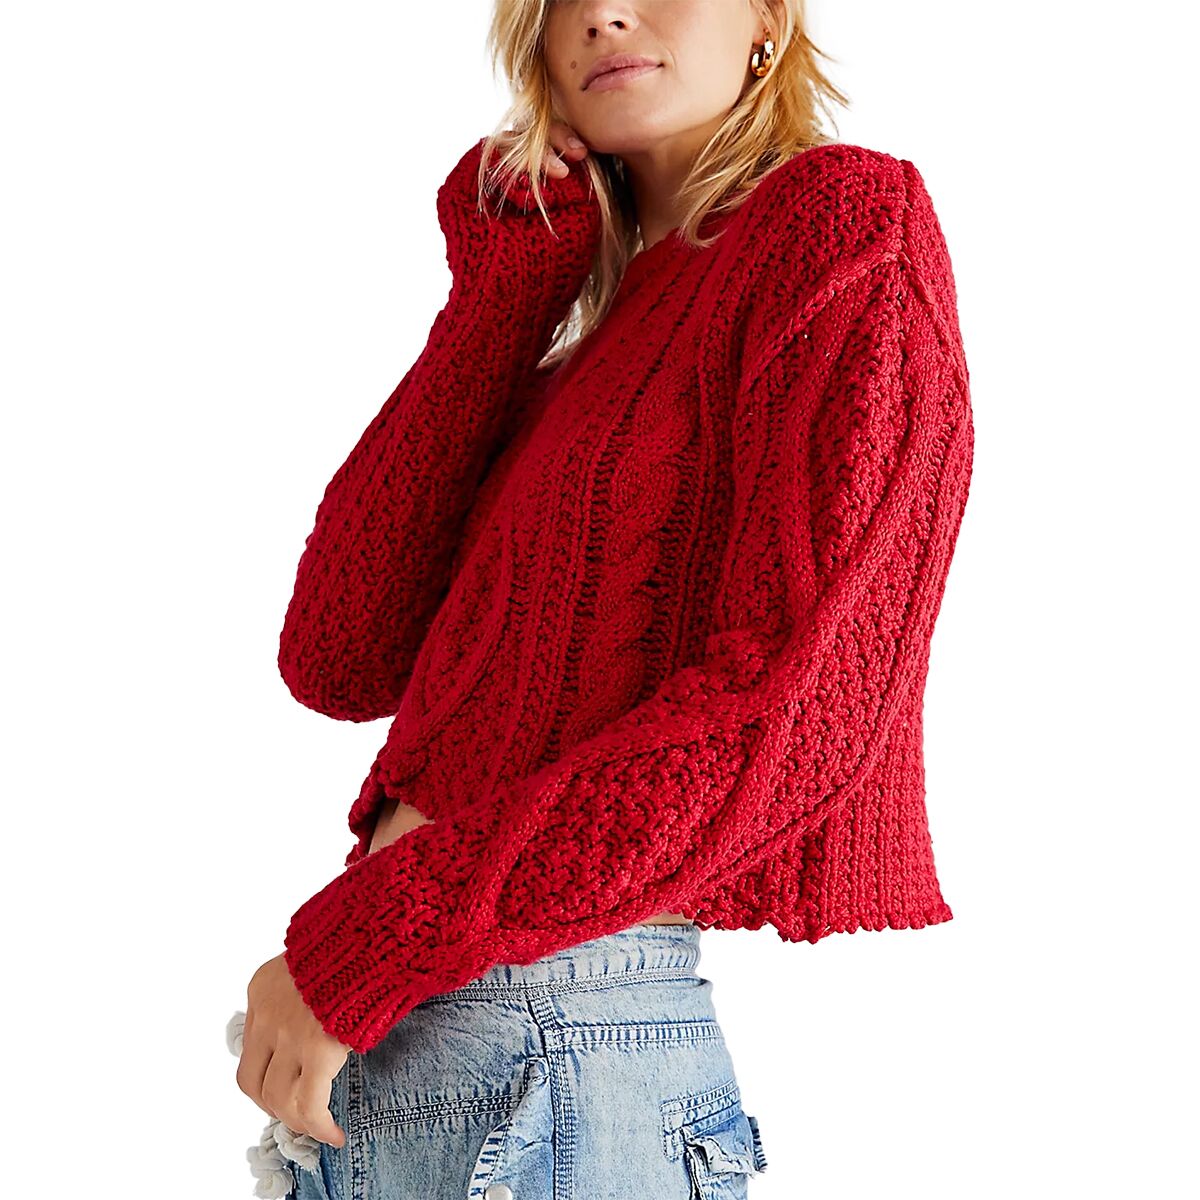 Free People Cutting Edge Cable Sweater - Women's